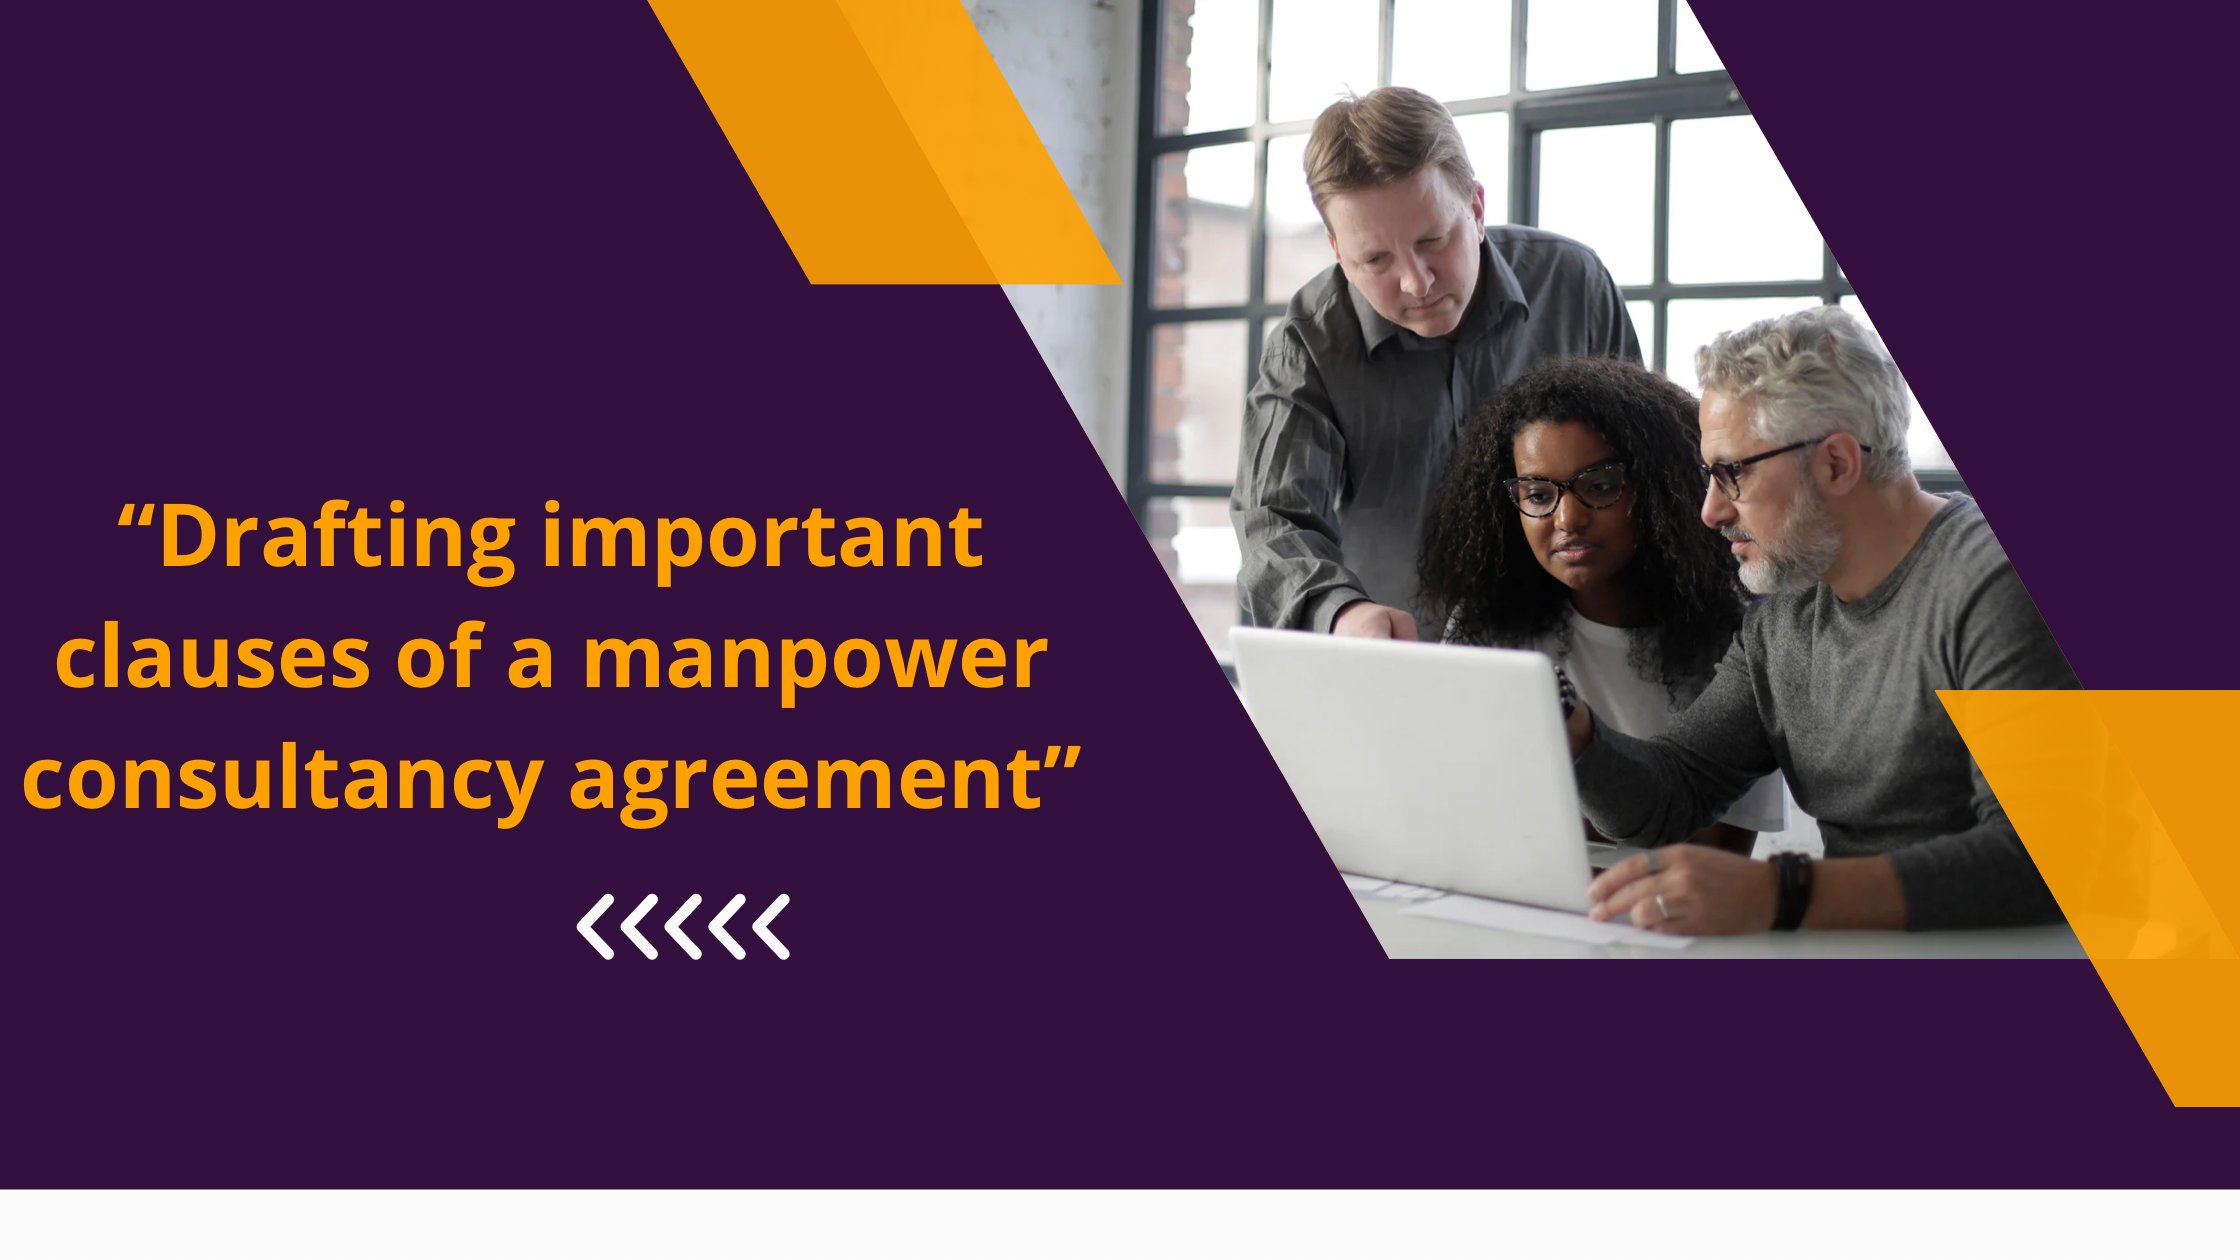 “Drafting important clauses of a manpower consultancy agreement”.